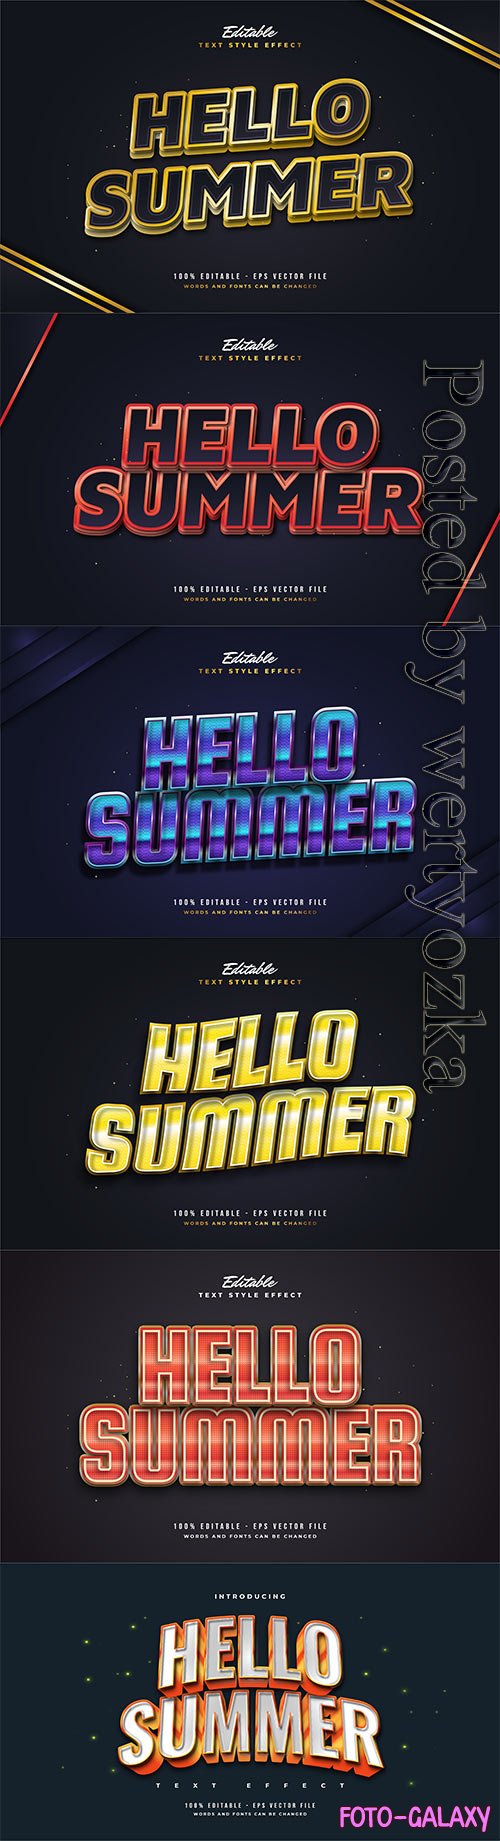 Hello summer text with vintage style